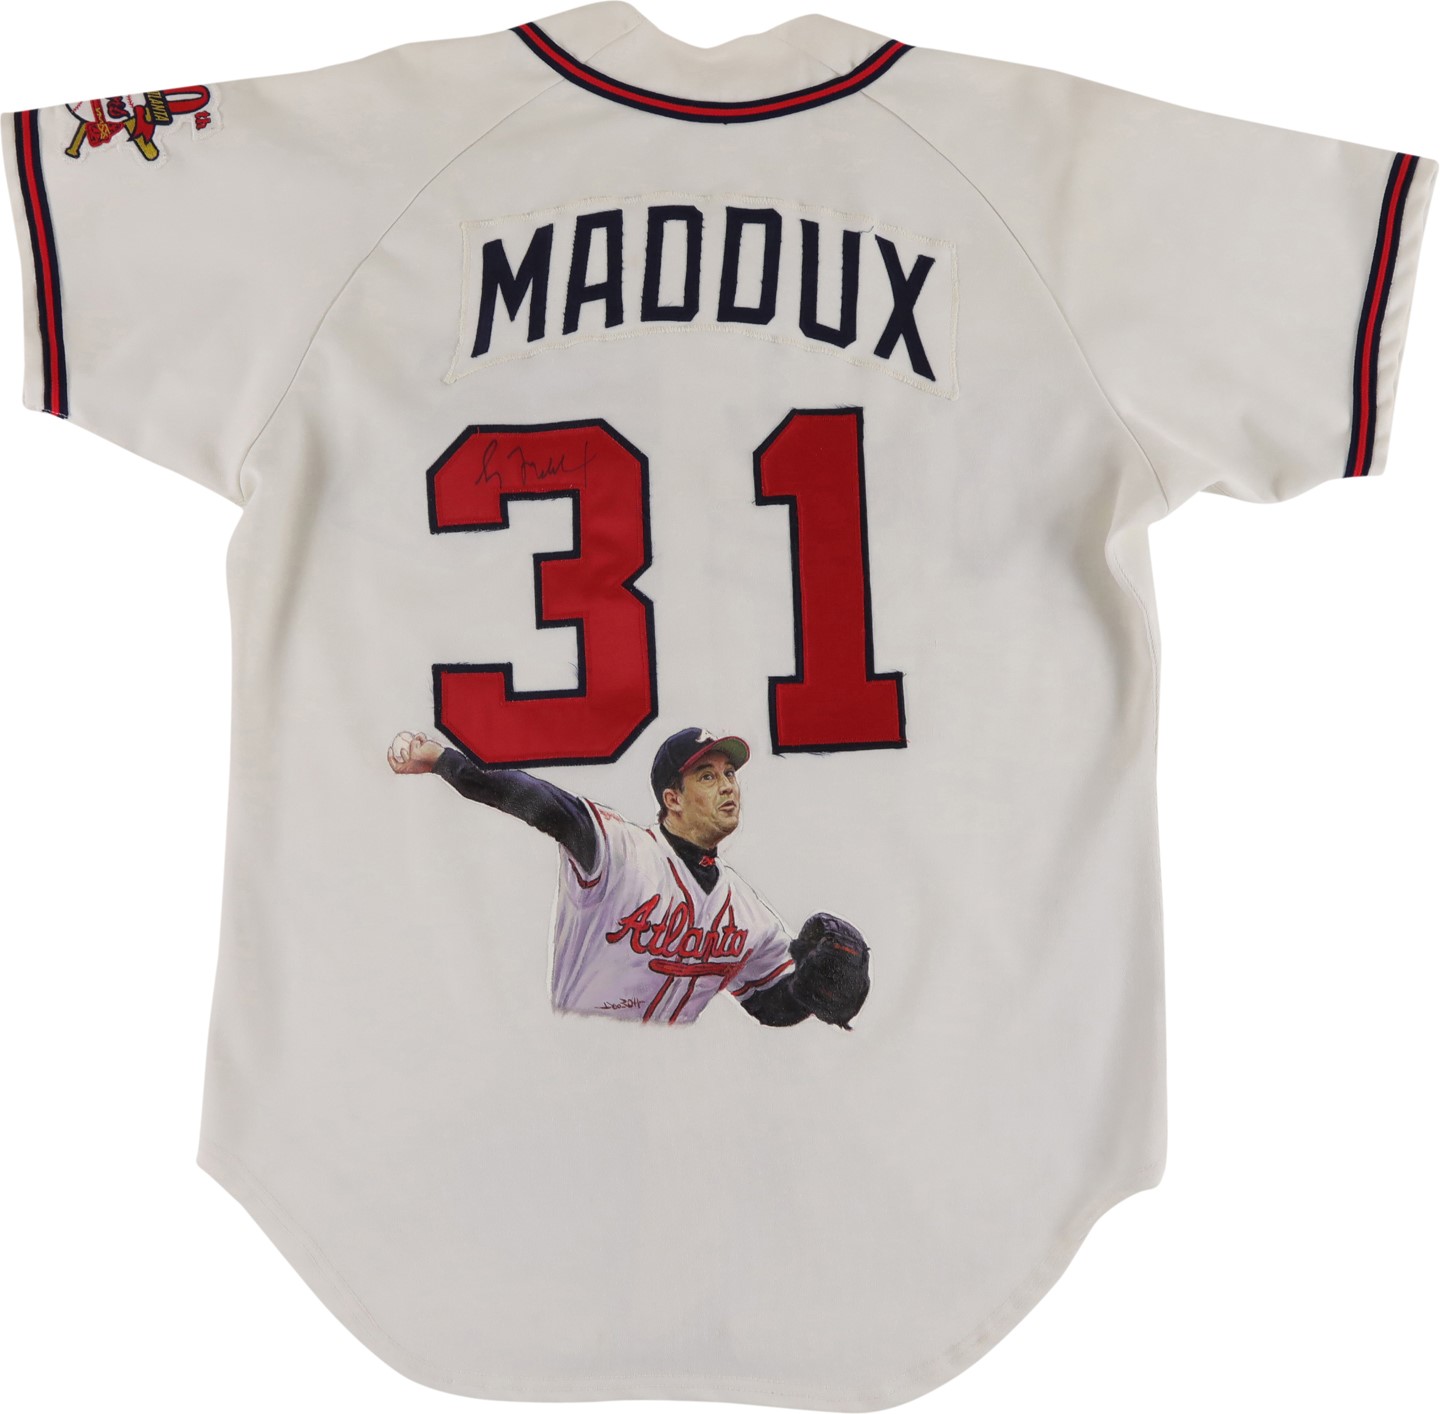 - 1995 Greg Maddux Atlanta Braves "1 of 1" Signed Game Worn Hand Painted Jersey